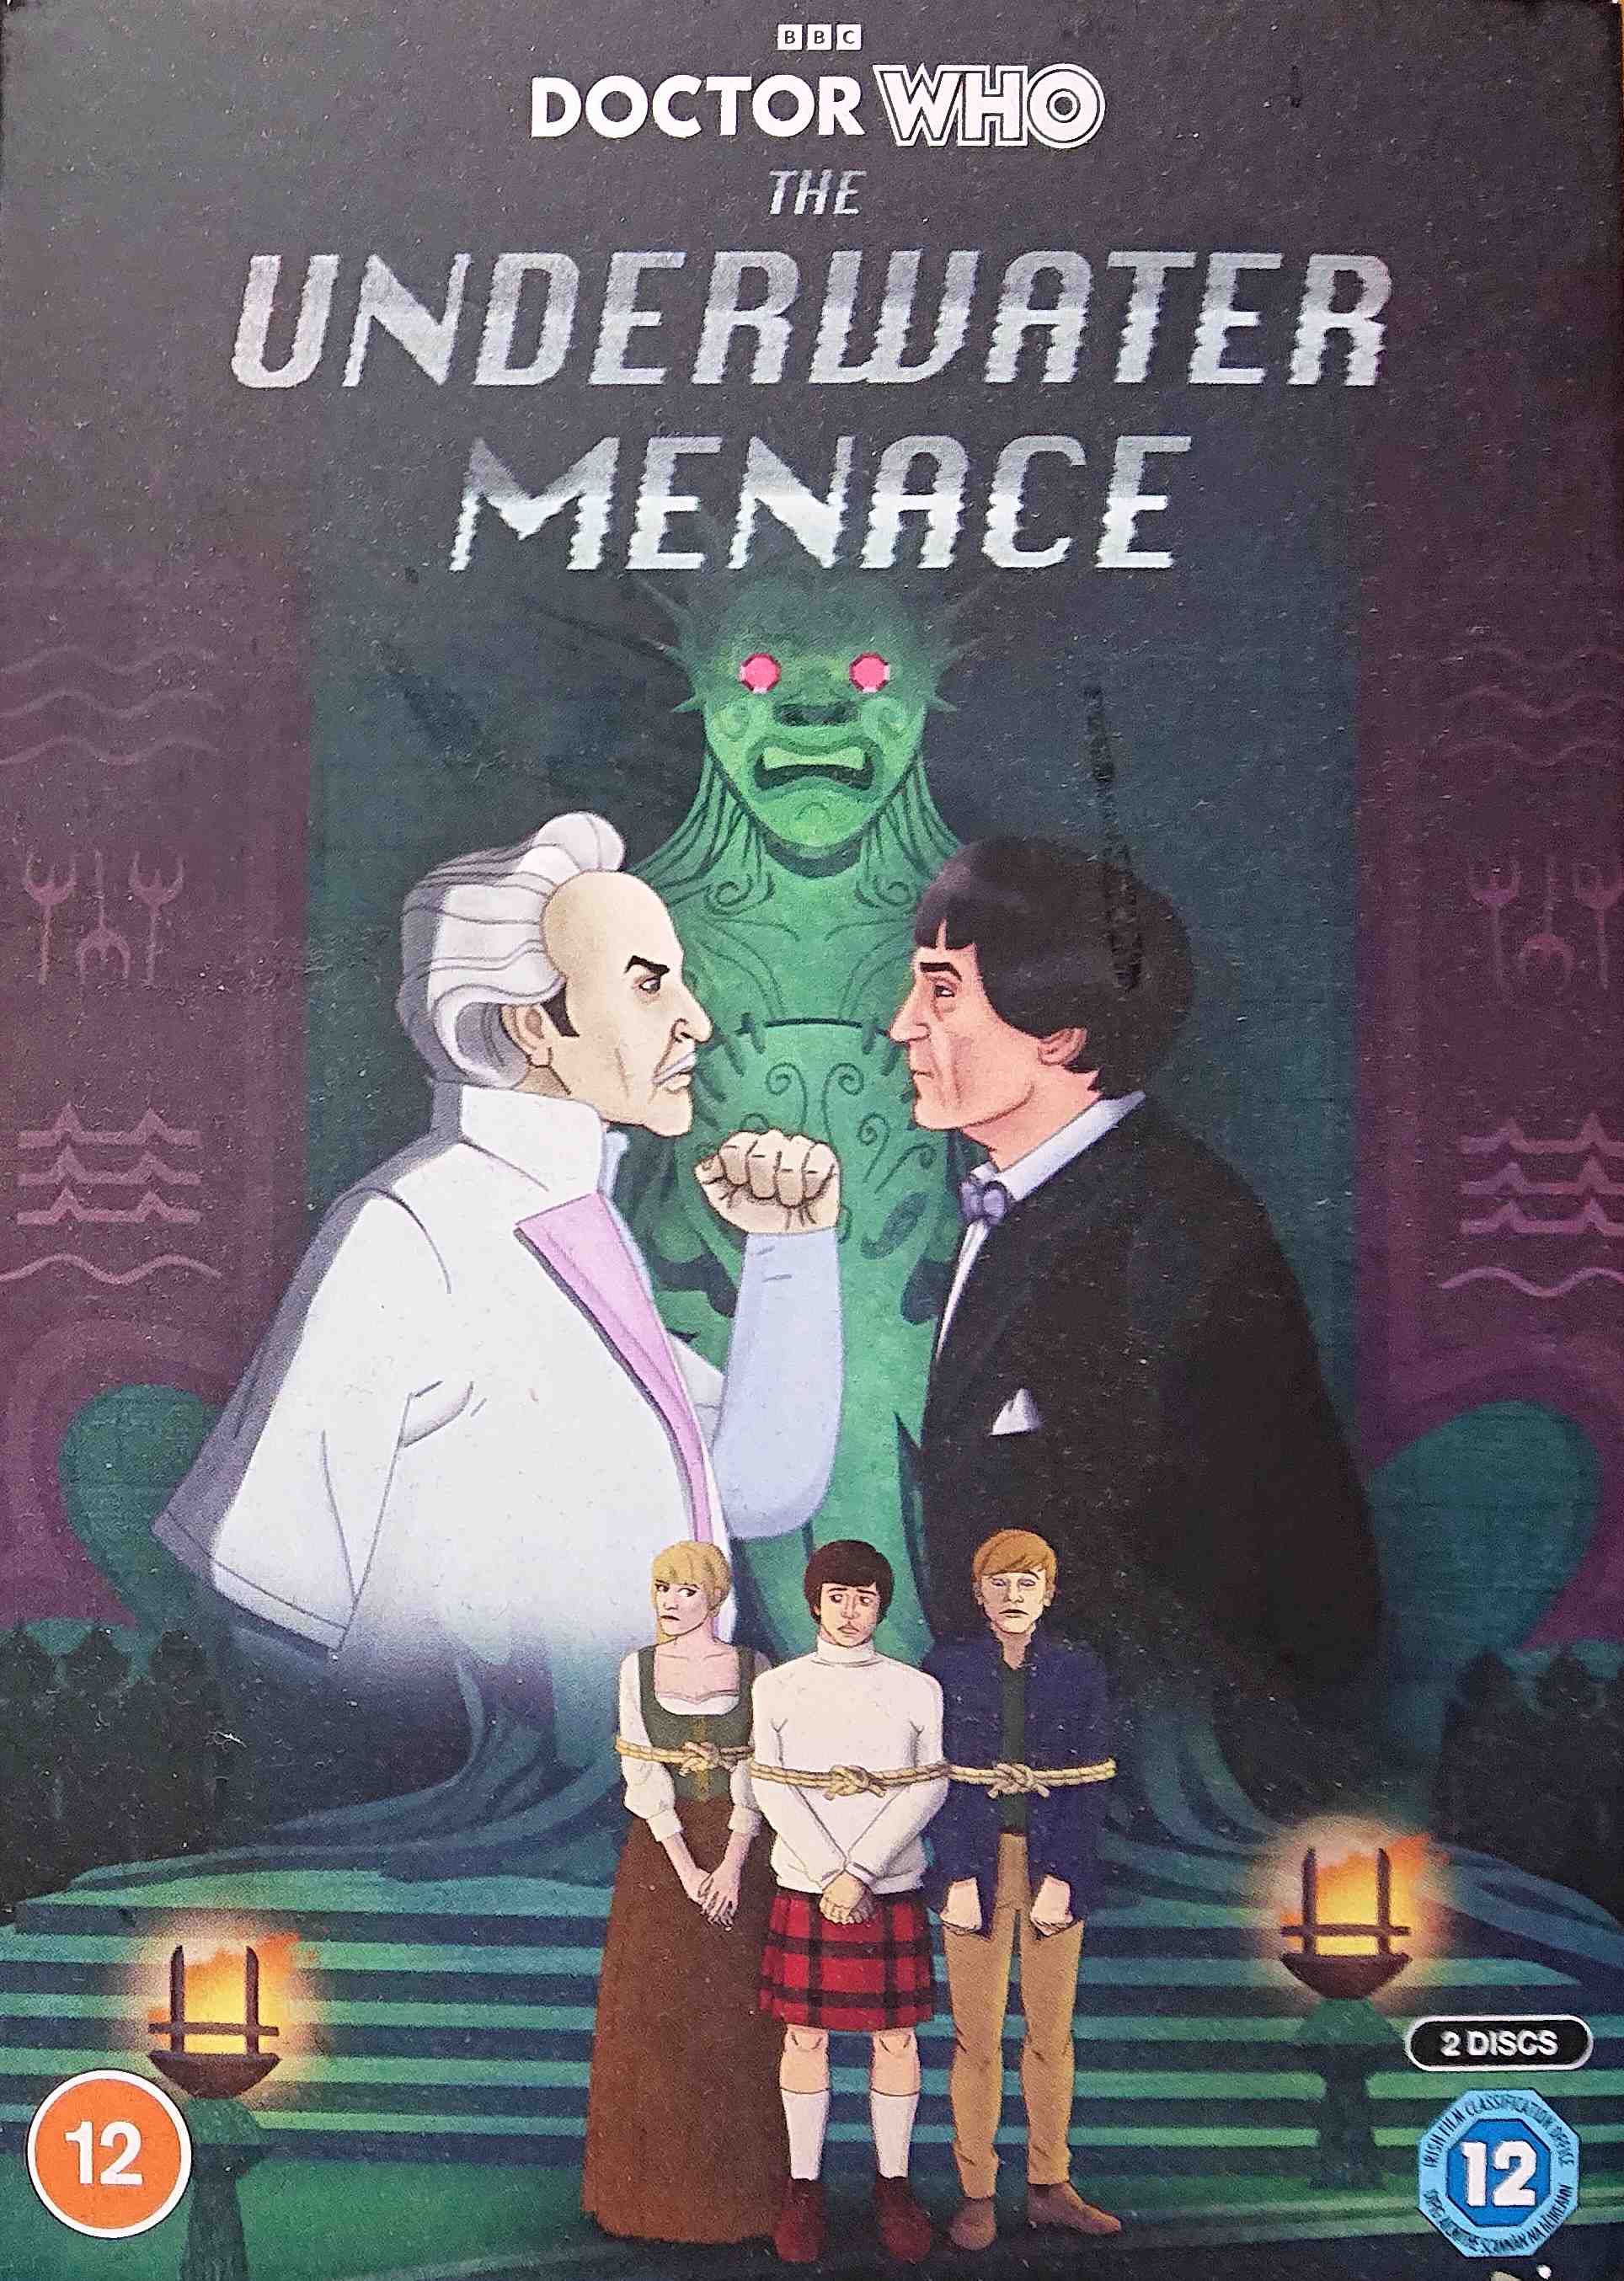 Picture of BBCDVD 4560 Doctor Who - The underwater menace by artist Geoffrey Orme from the BBC dvds - Records and Tapes library